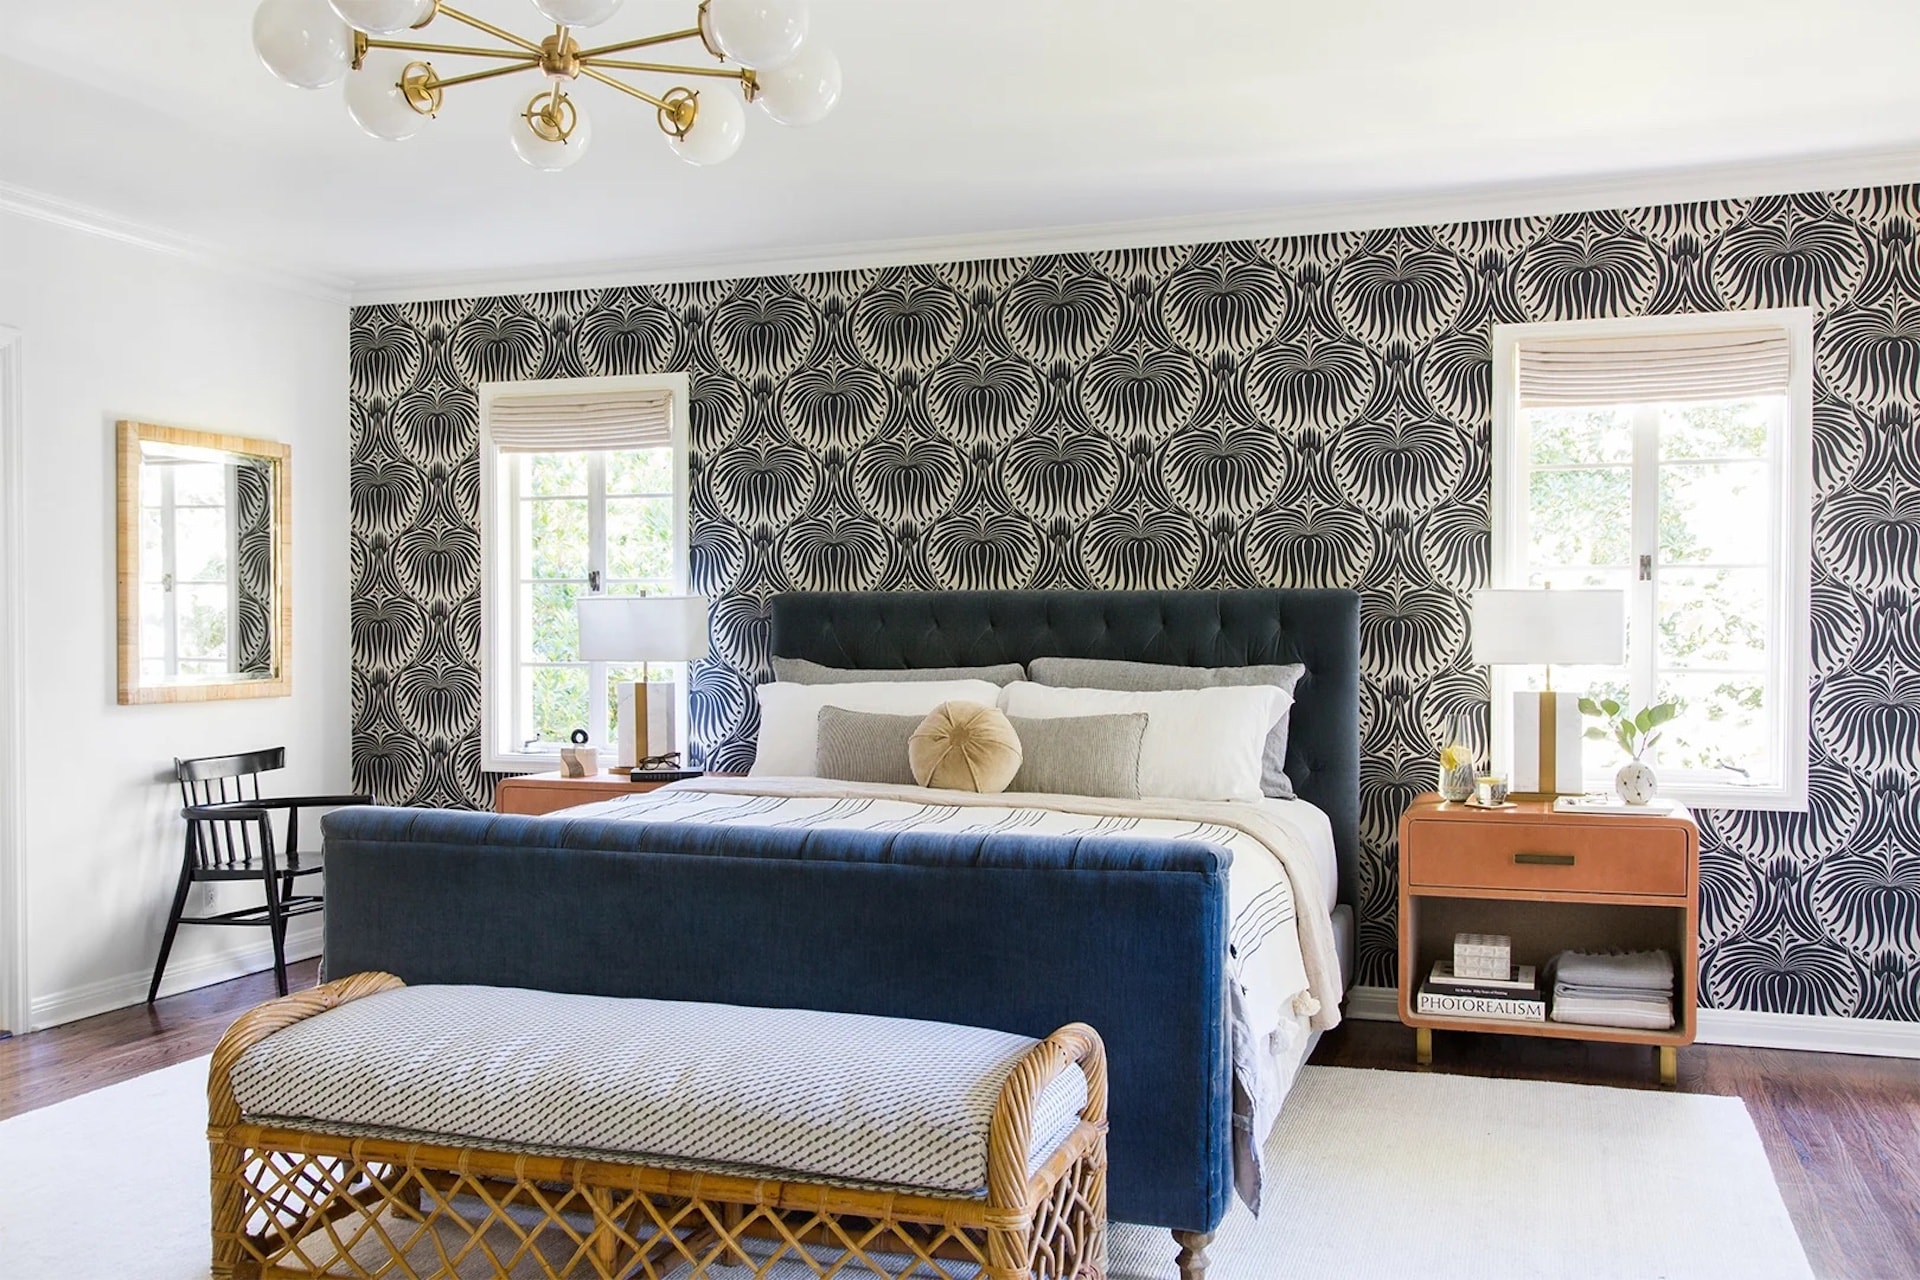 14 Helpful Tips For Accent Walls: Do’s And Don’ts Before You Begin